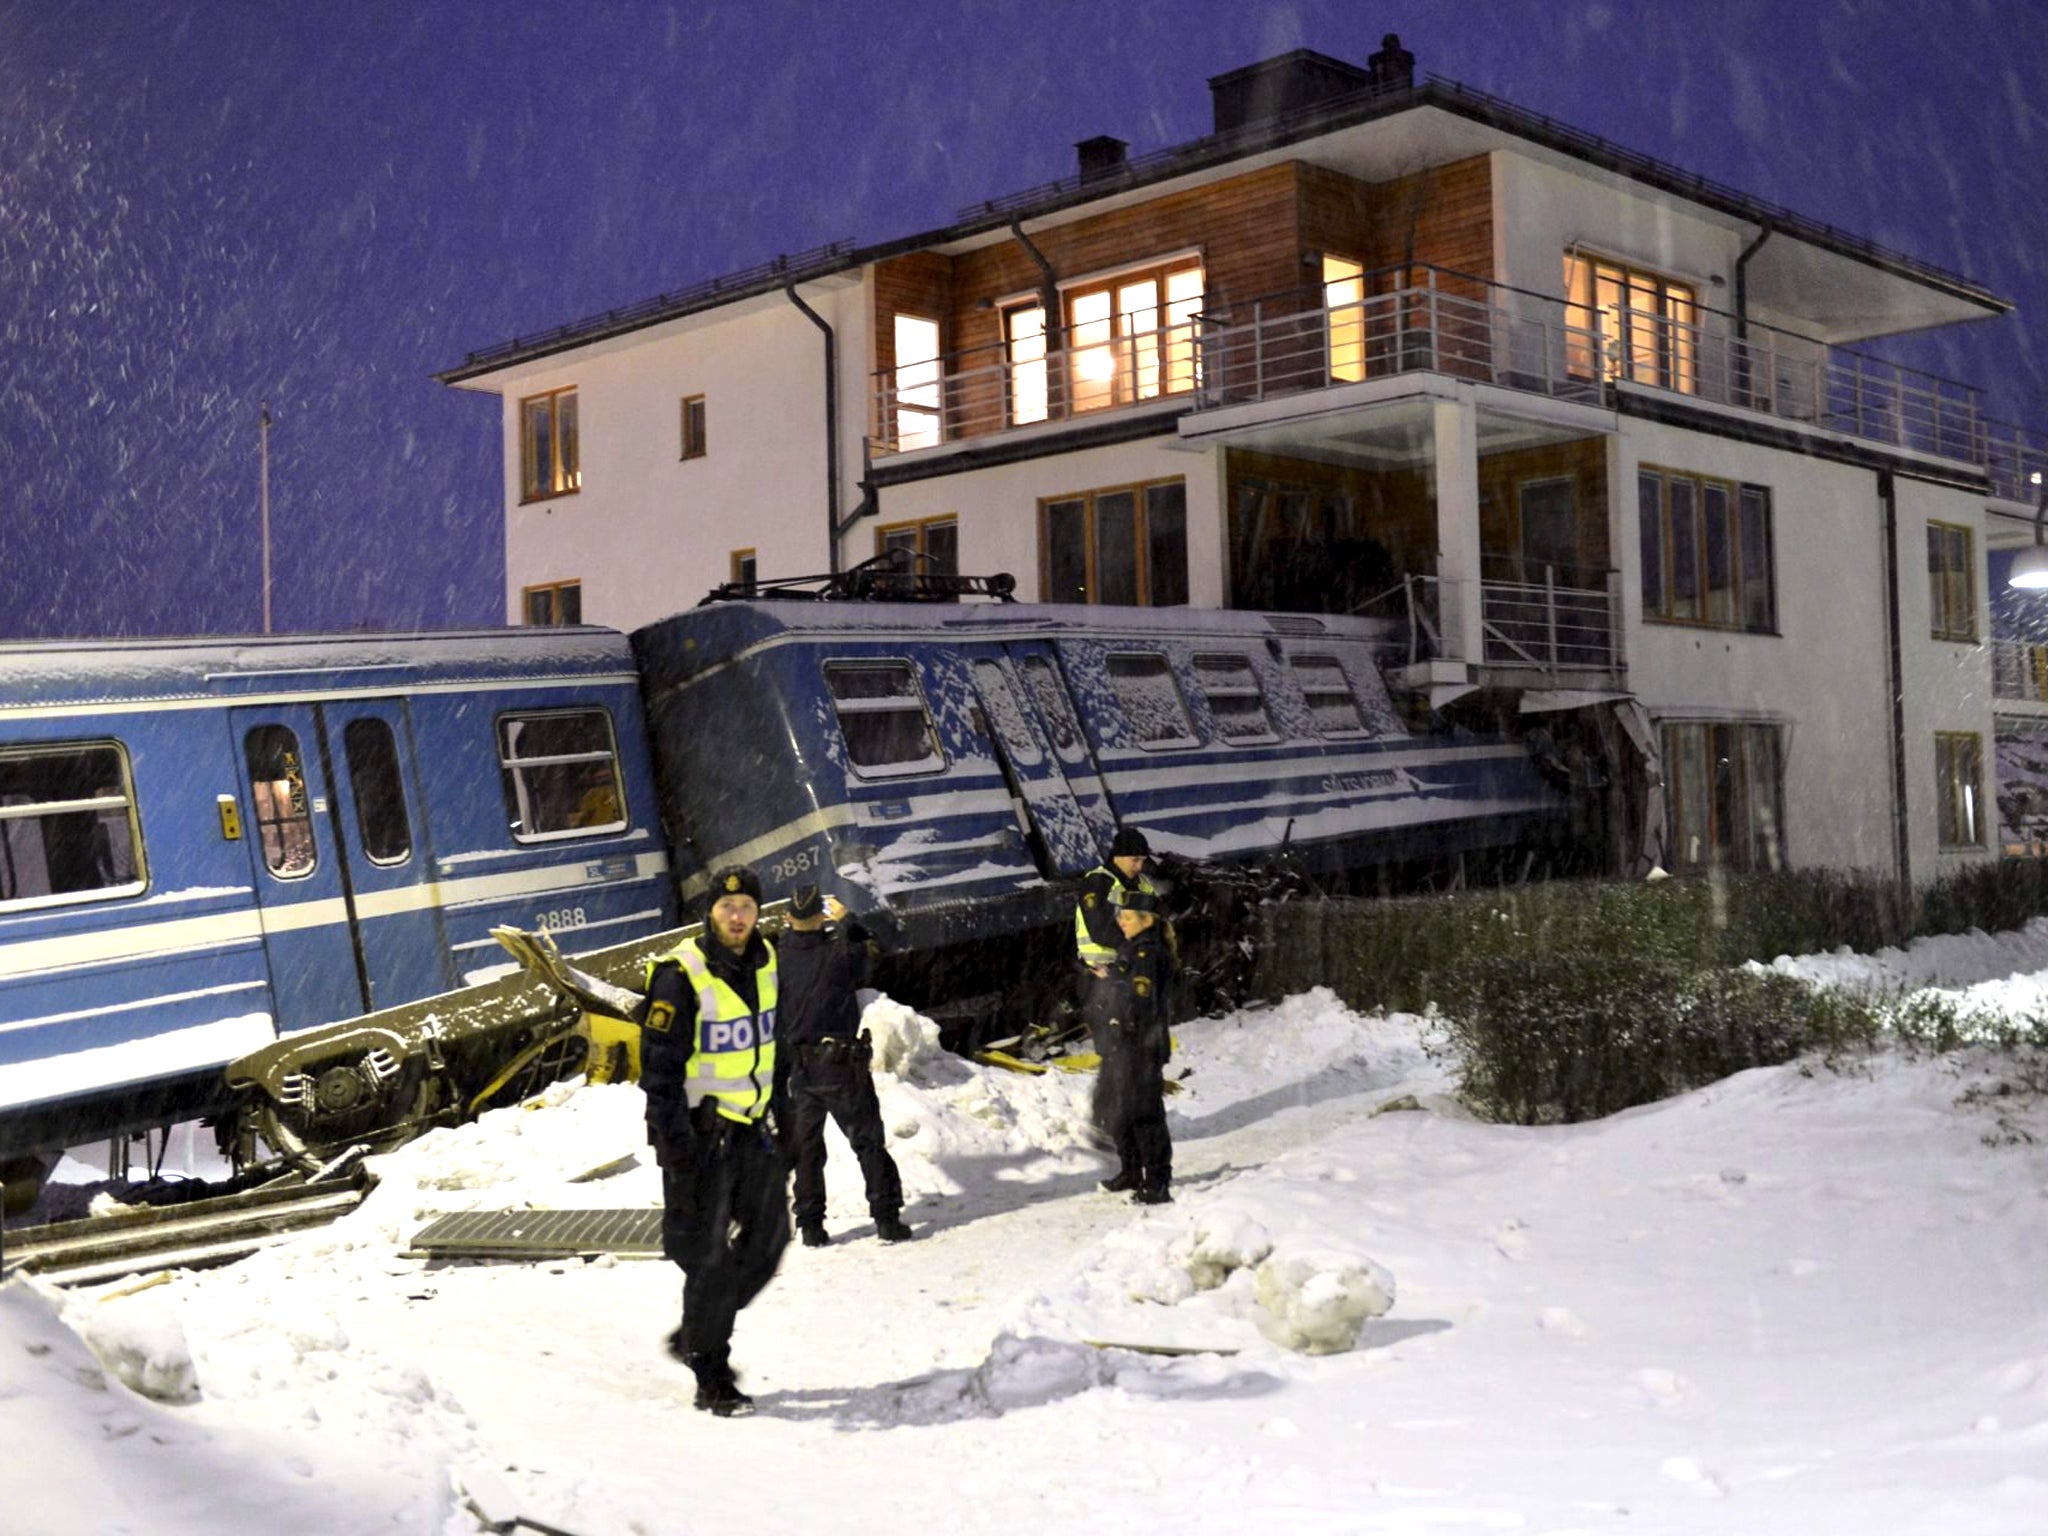 The runaway train crashed into a building in January